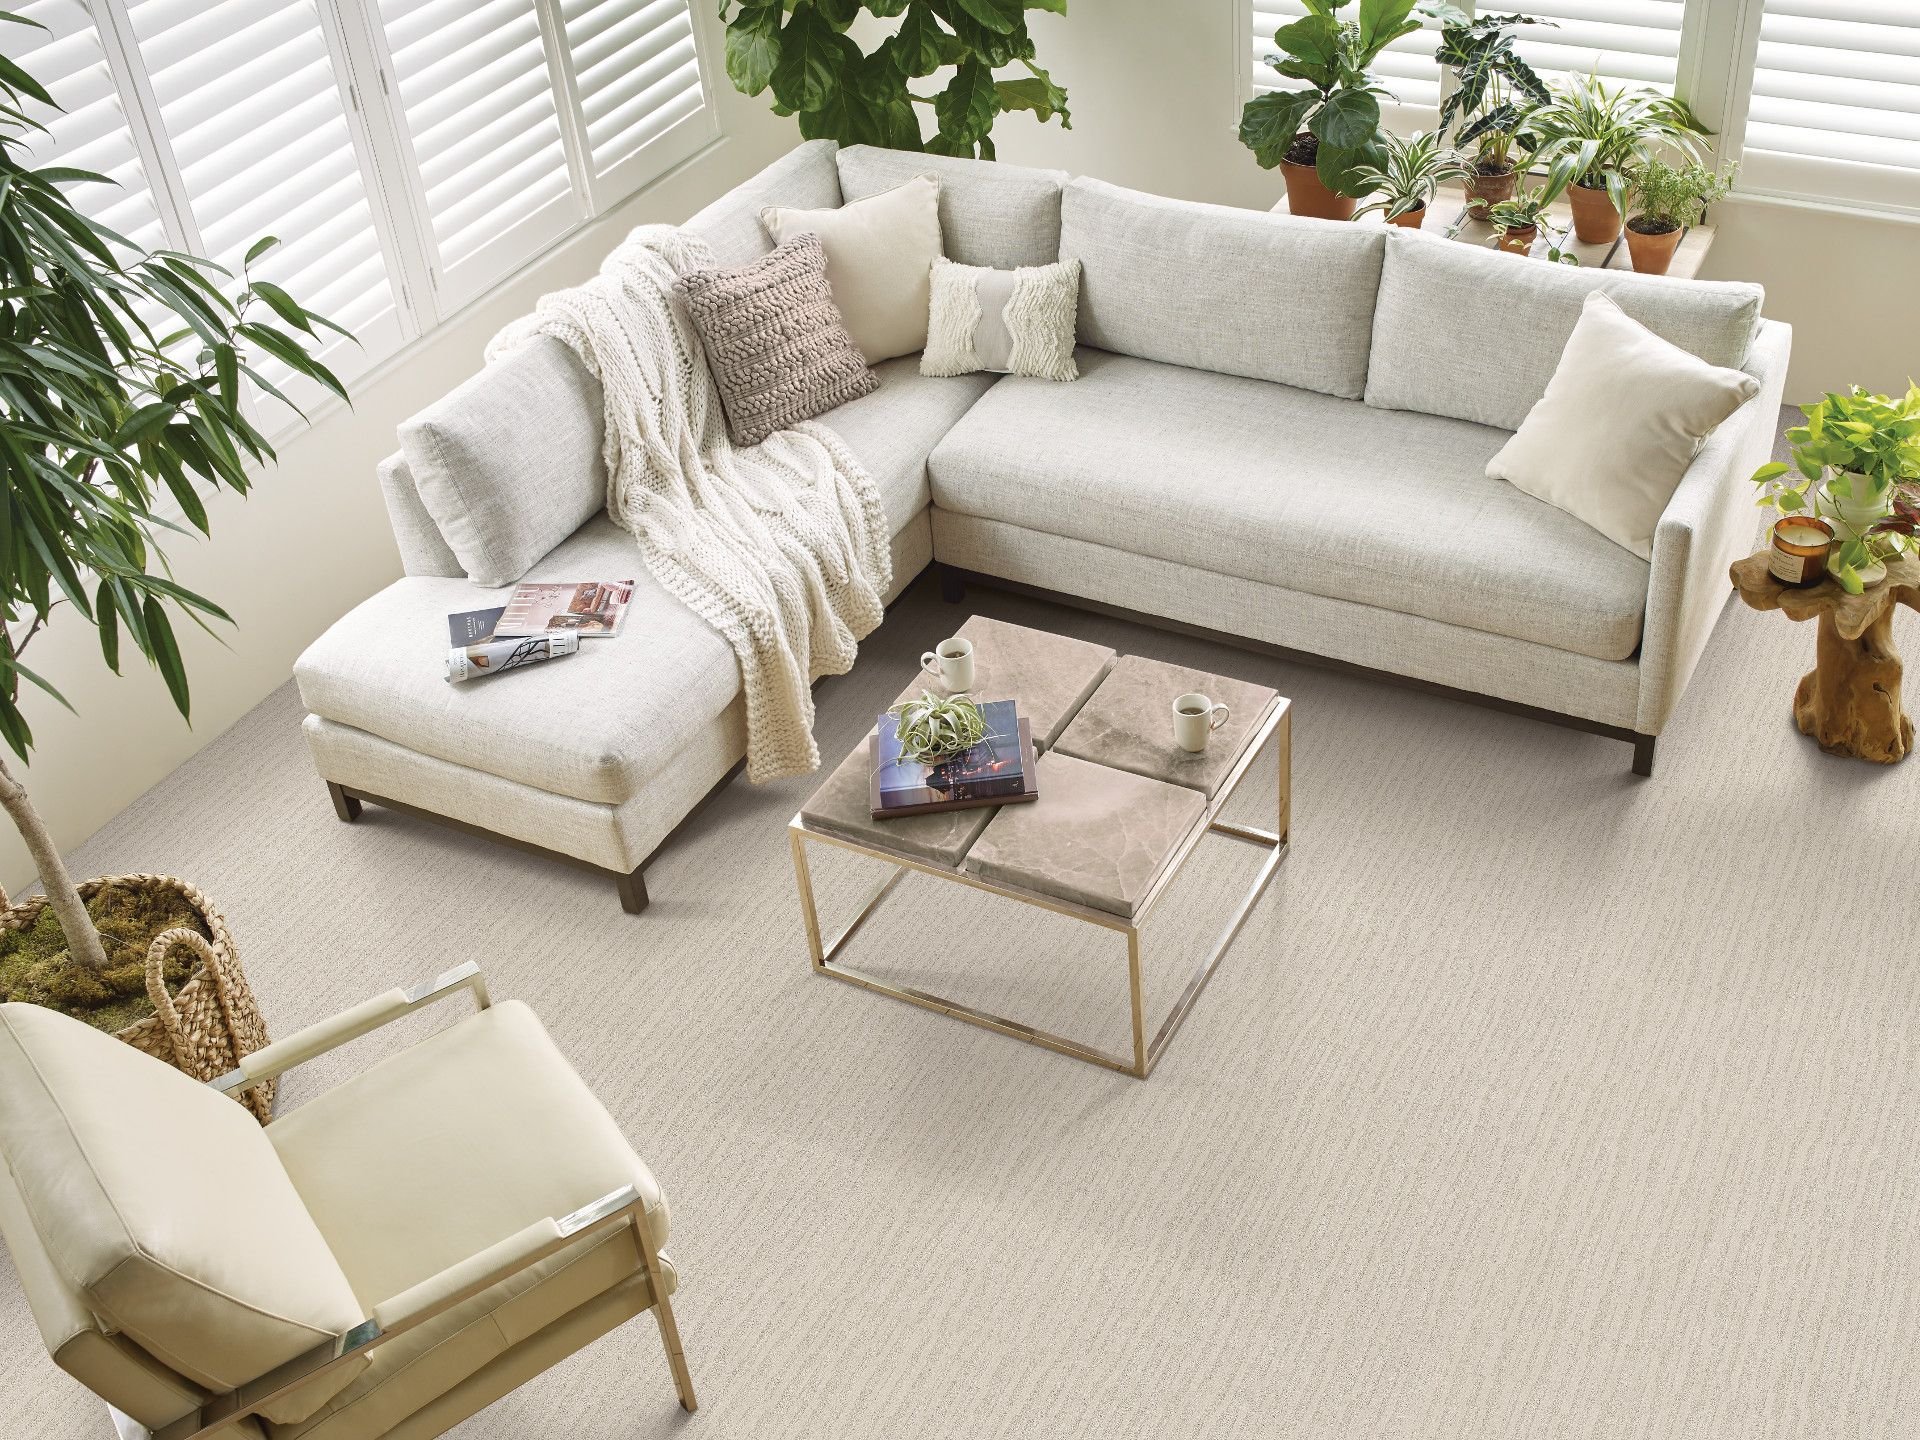 Large living room with white couch on carpet from Horrigan Flooring Center in Westminster